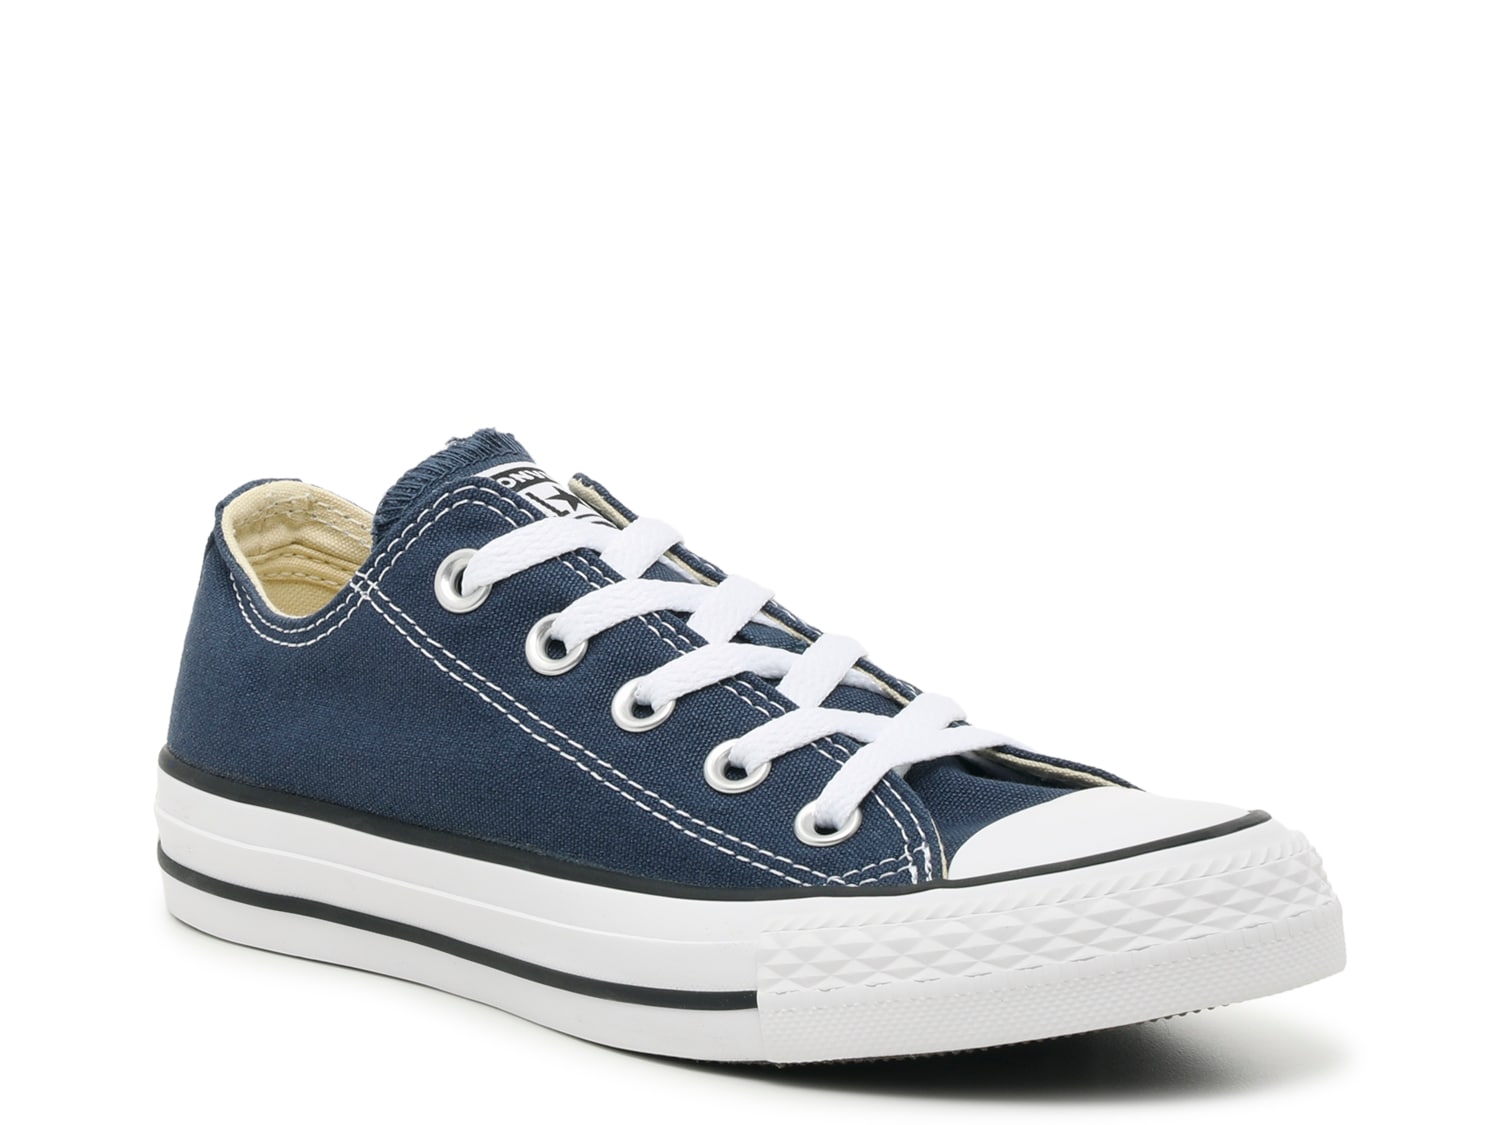 Converse Chuck Taylor All Star Low-Top Sneaker - Men's - Free Shipping ...